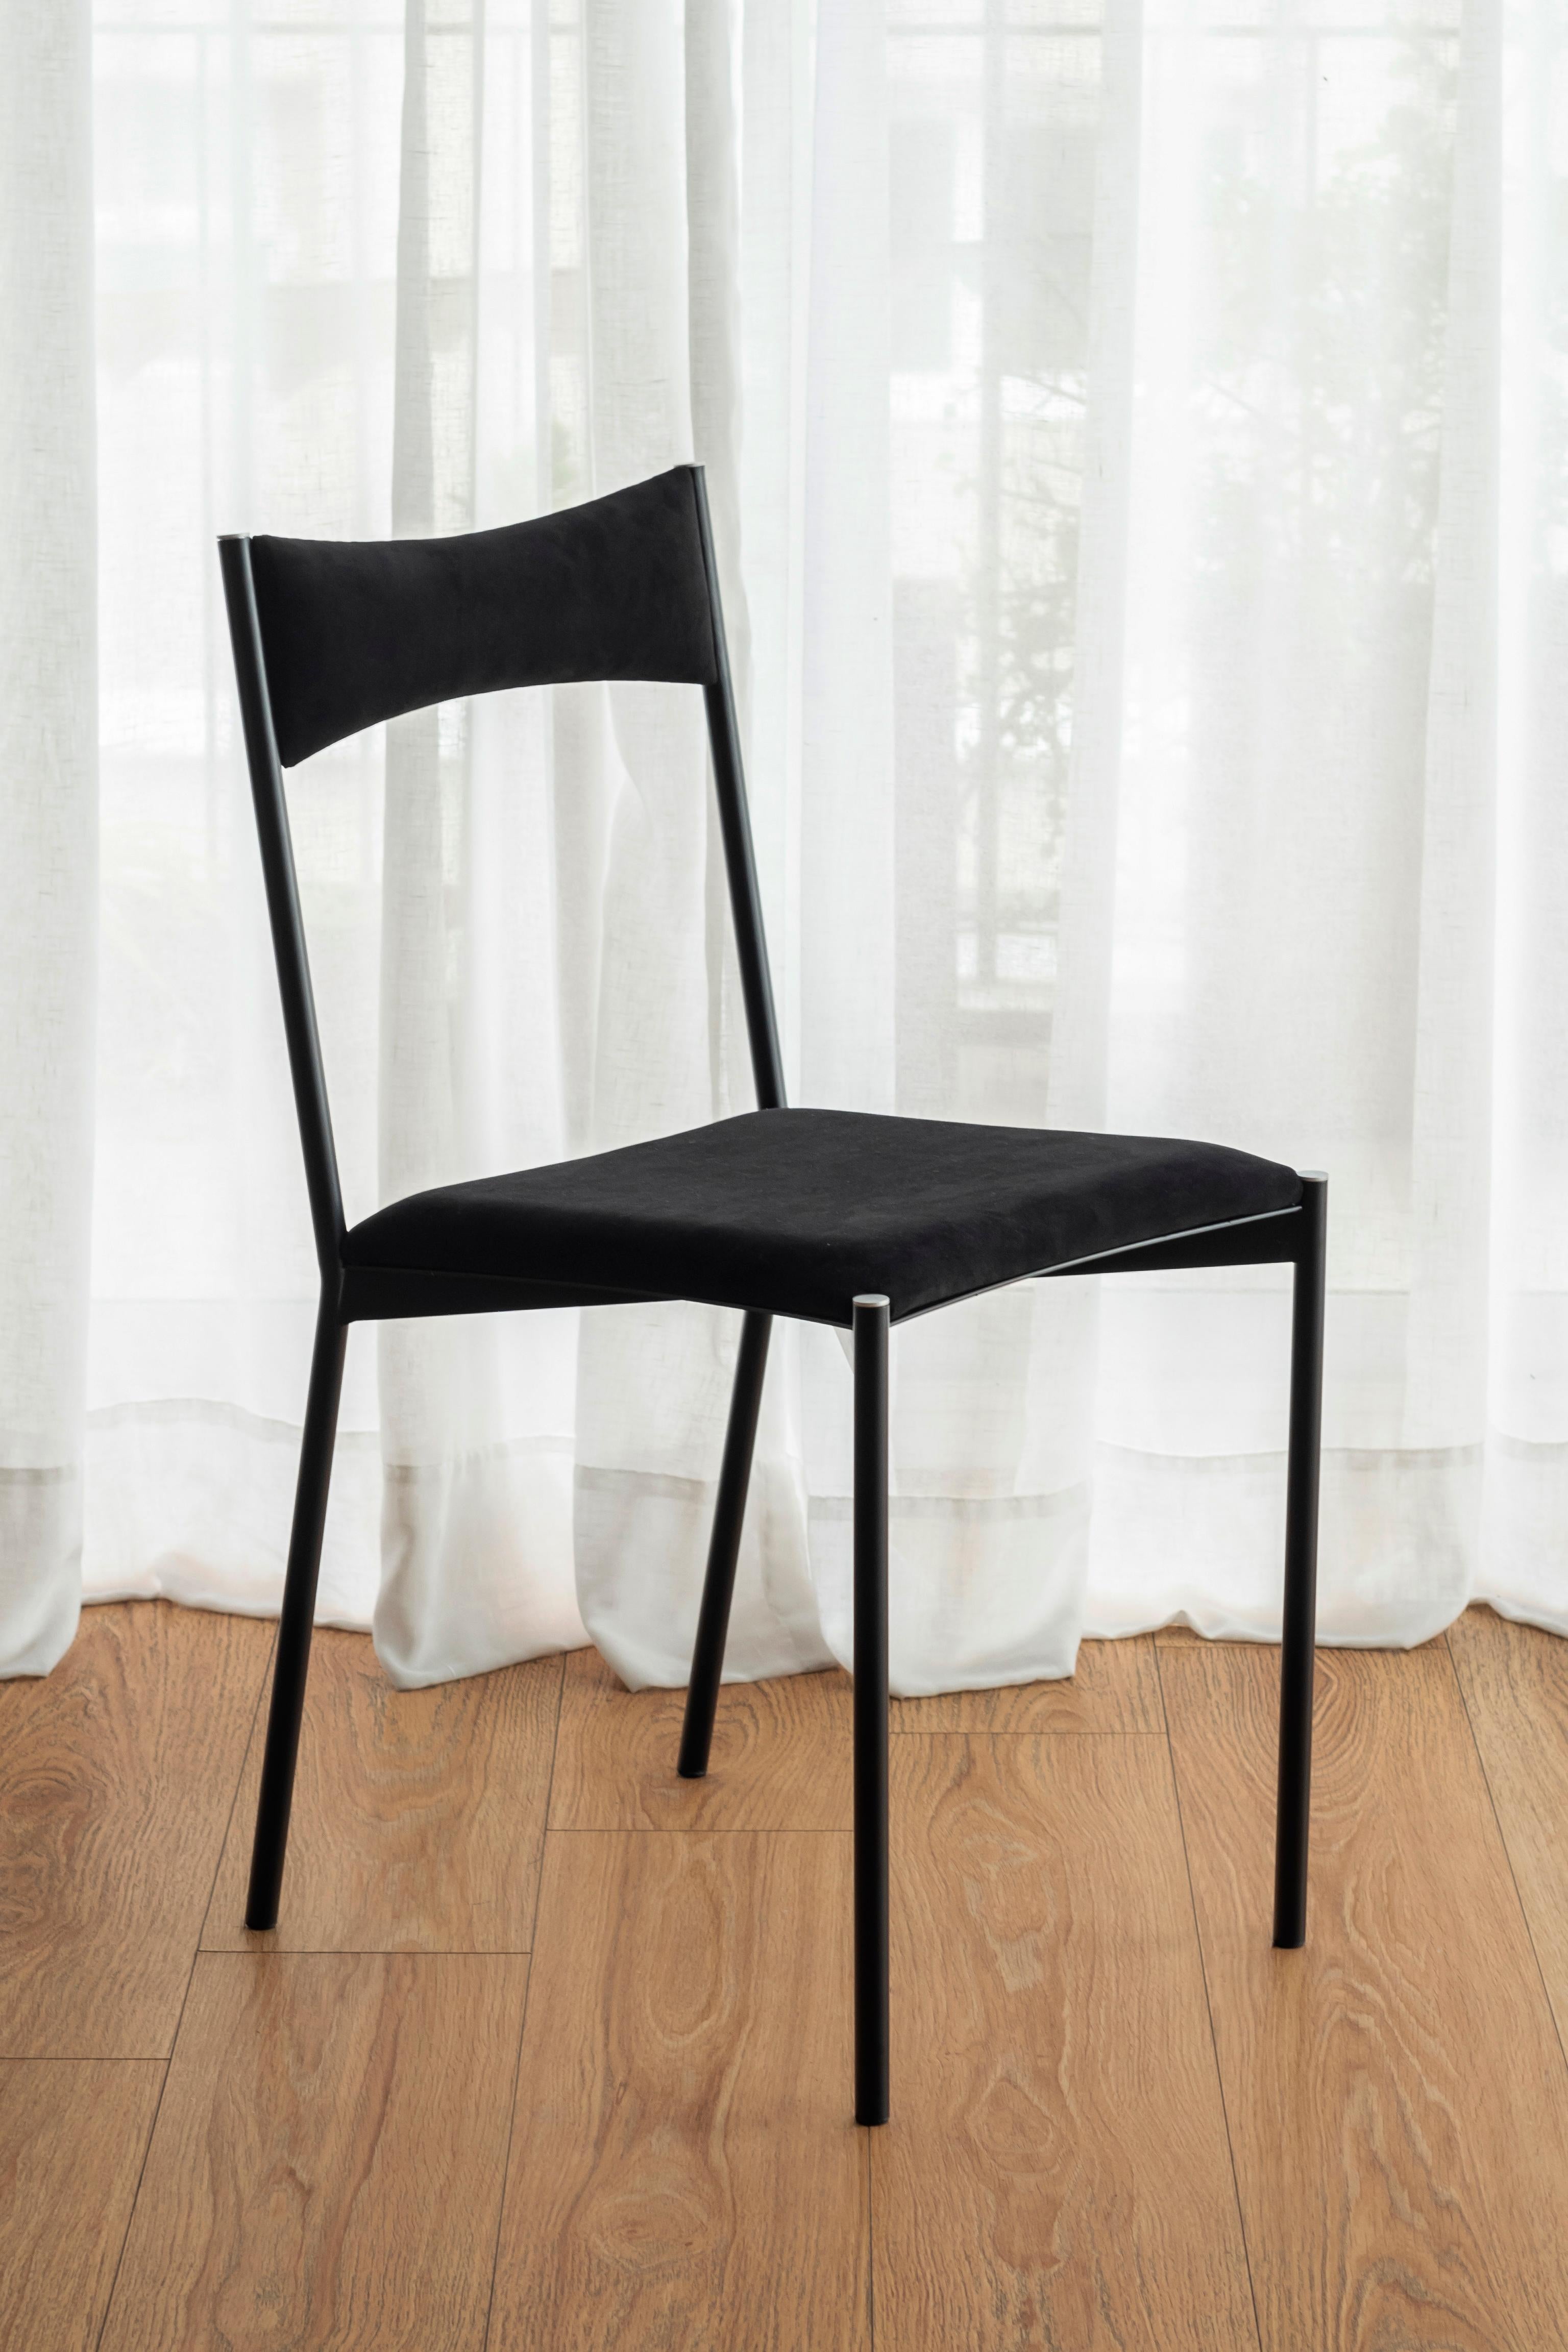 Tensa chair, black by Ries
Dimensions: W40 x D49,5 x H82 cm 
Materials: Round steel tube, laser cut metal sheet, high density foam, velvet upholstery, aluminum/bronze caps
Matte powder coated painting (Finishings)

Also Available: Dark Blue,